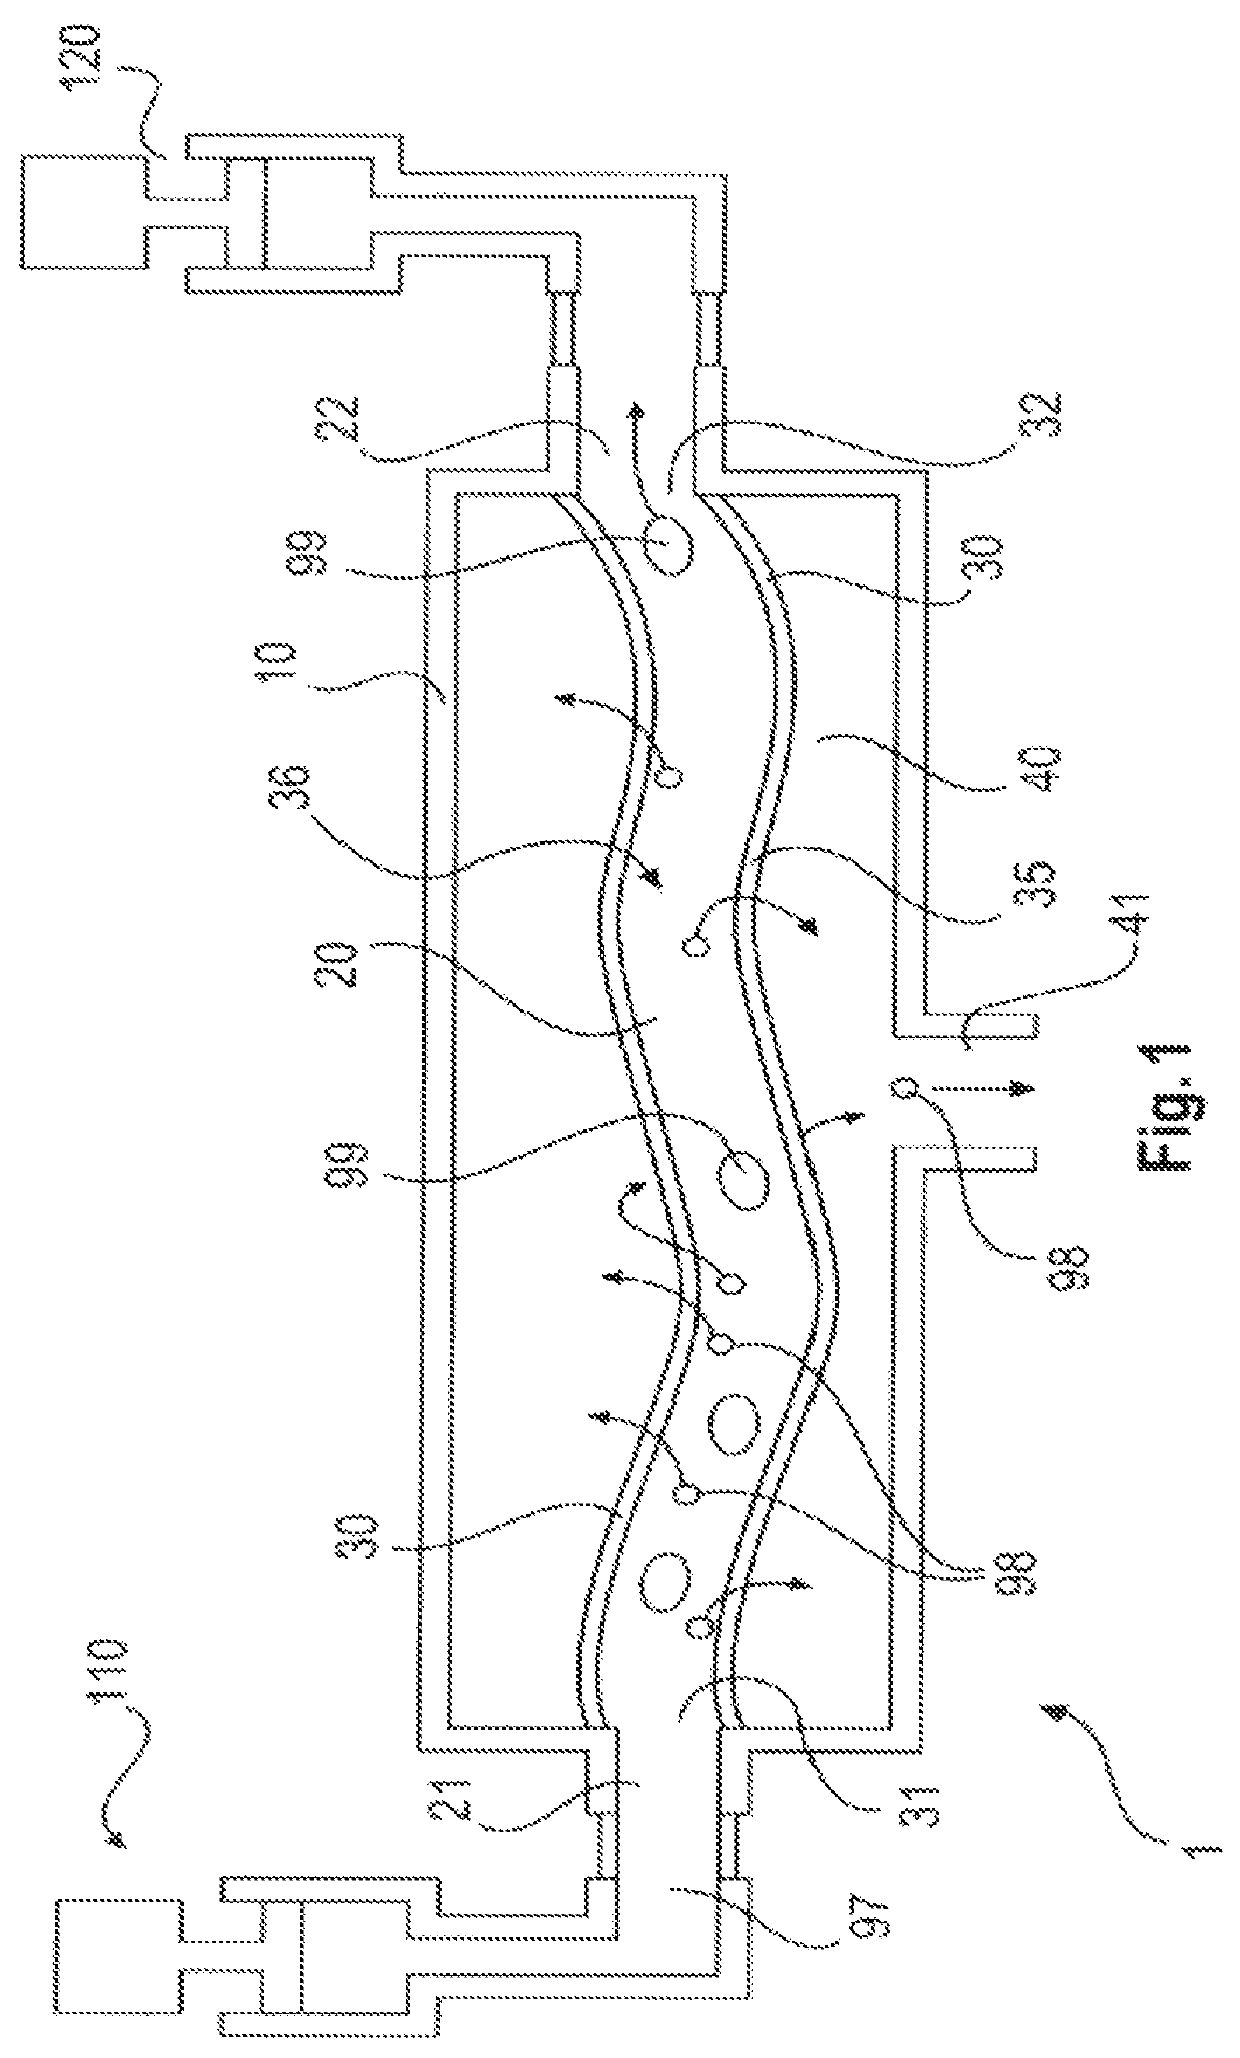 Device for cross flow filtration